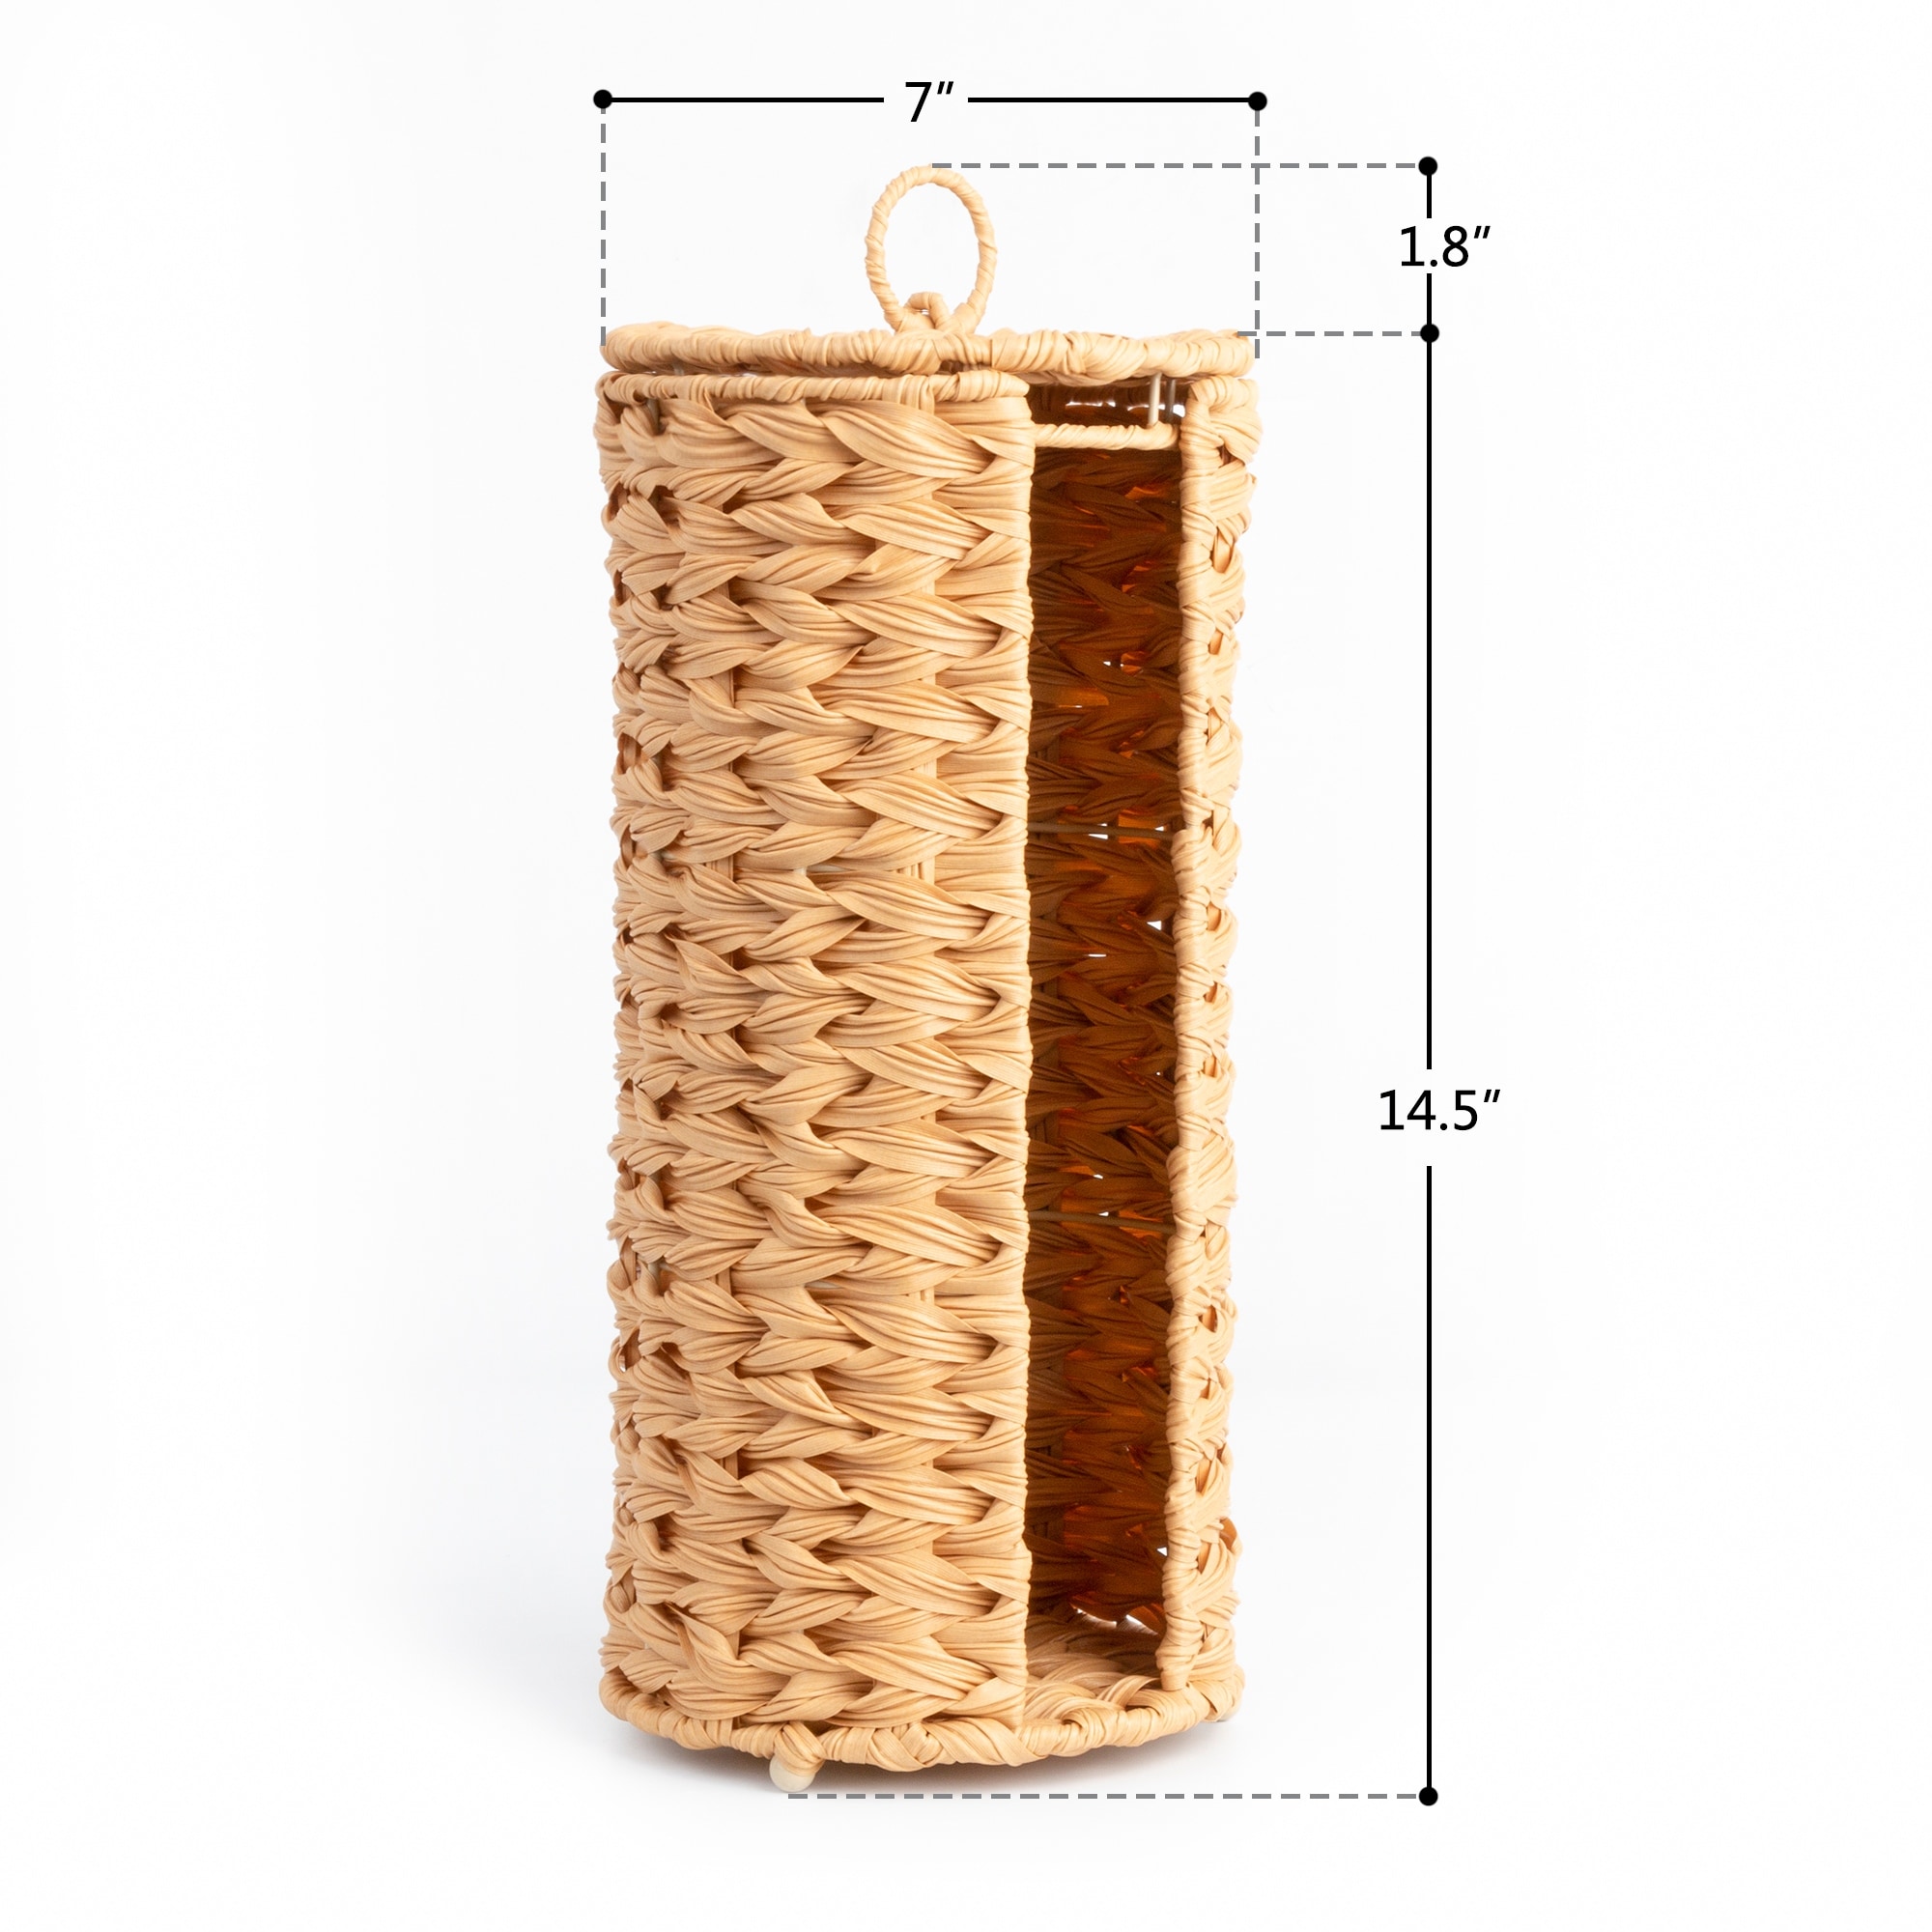 https://ak1.ostkcdn.com/images/products/is/images/direct/1f6d02d4b0440acab09142fab9dcdc76d3588695/Freestanding-Toilet-Paper-Holder-with-Lid%2C-Synthetic-Wicker-Toilet-Roll-Holder%2C-Round.jpg